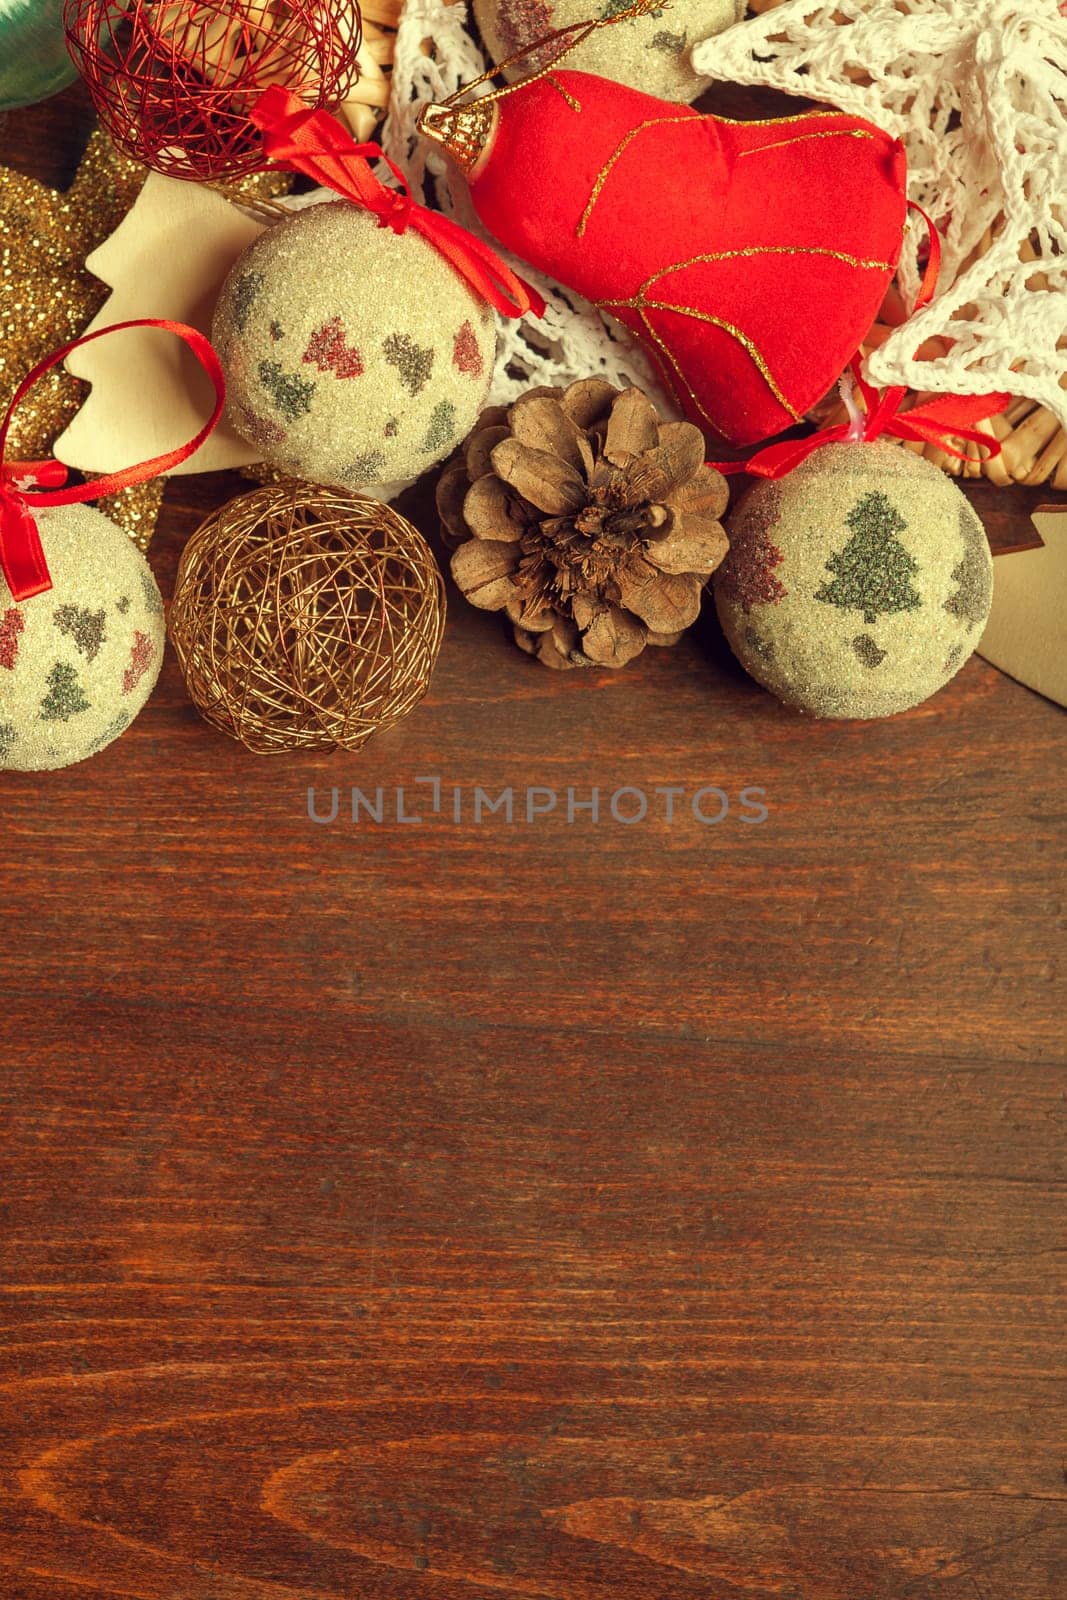 Christmas toys and decorations on wooden table by DCStudio